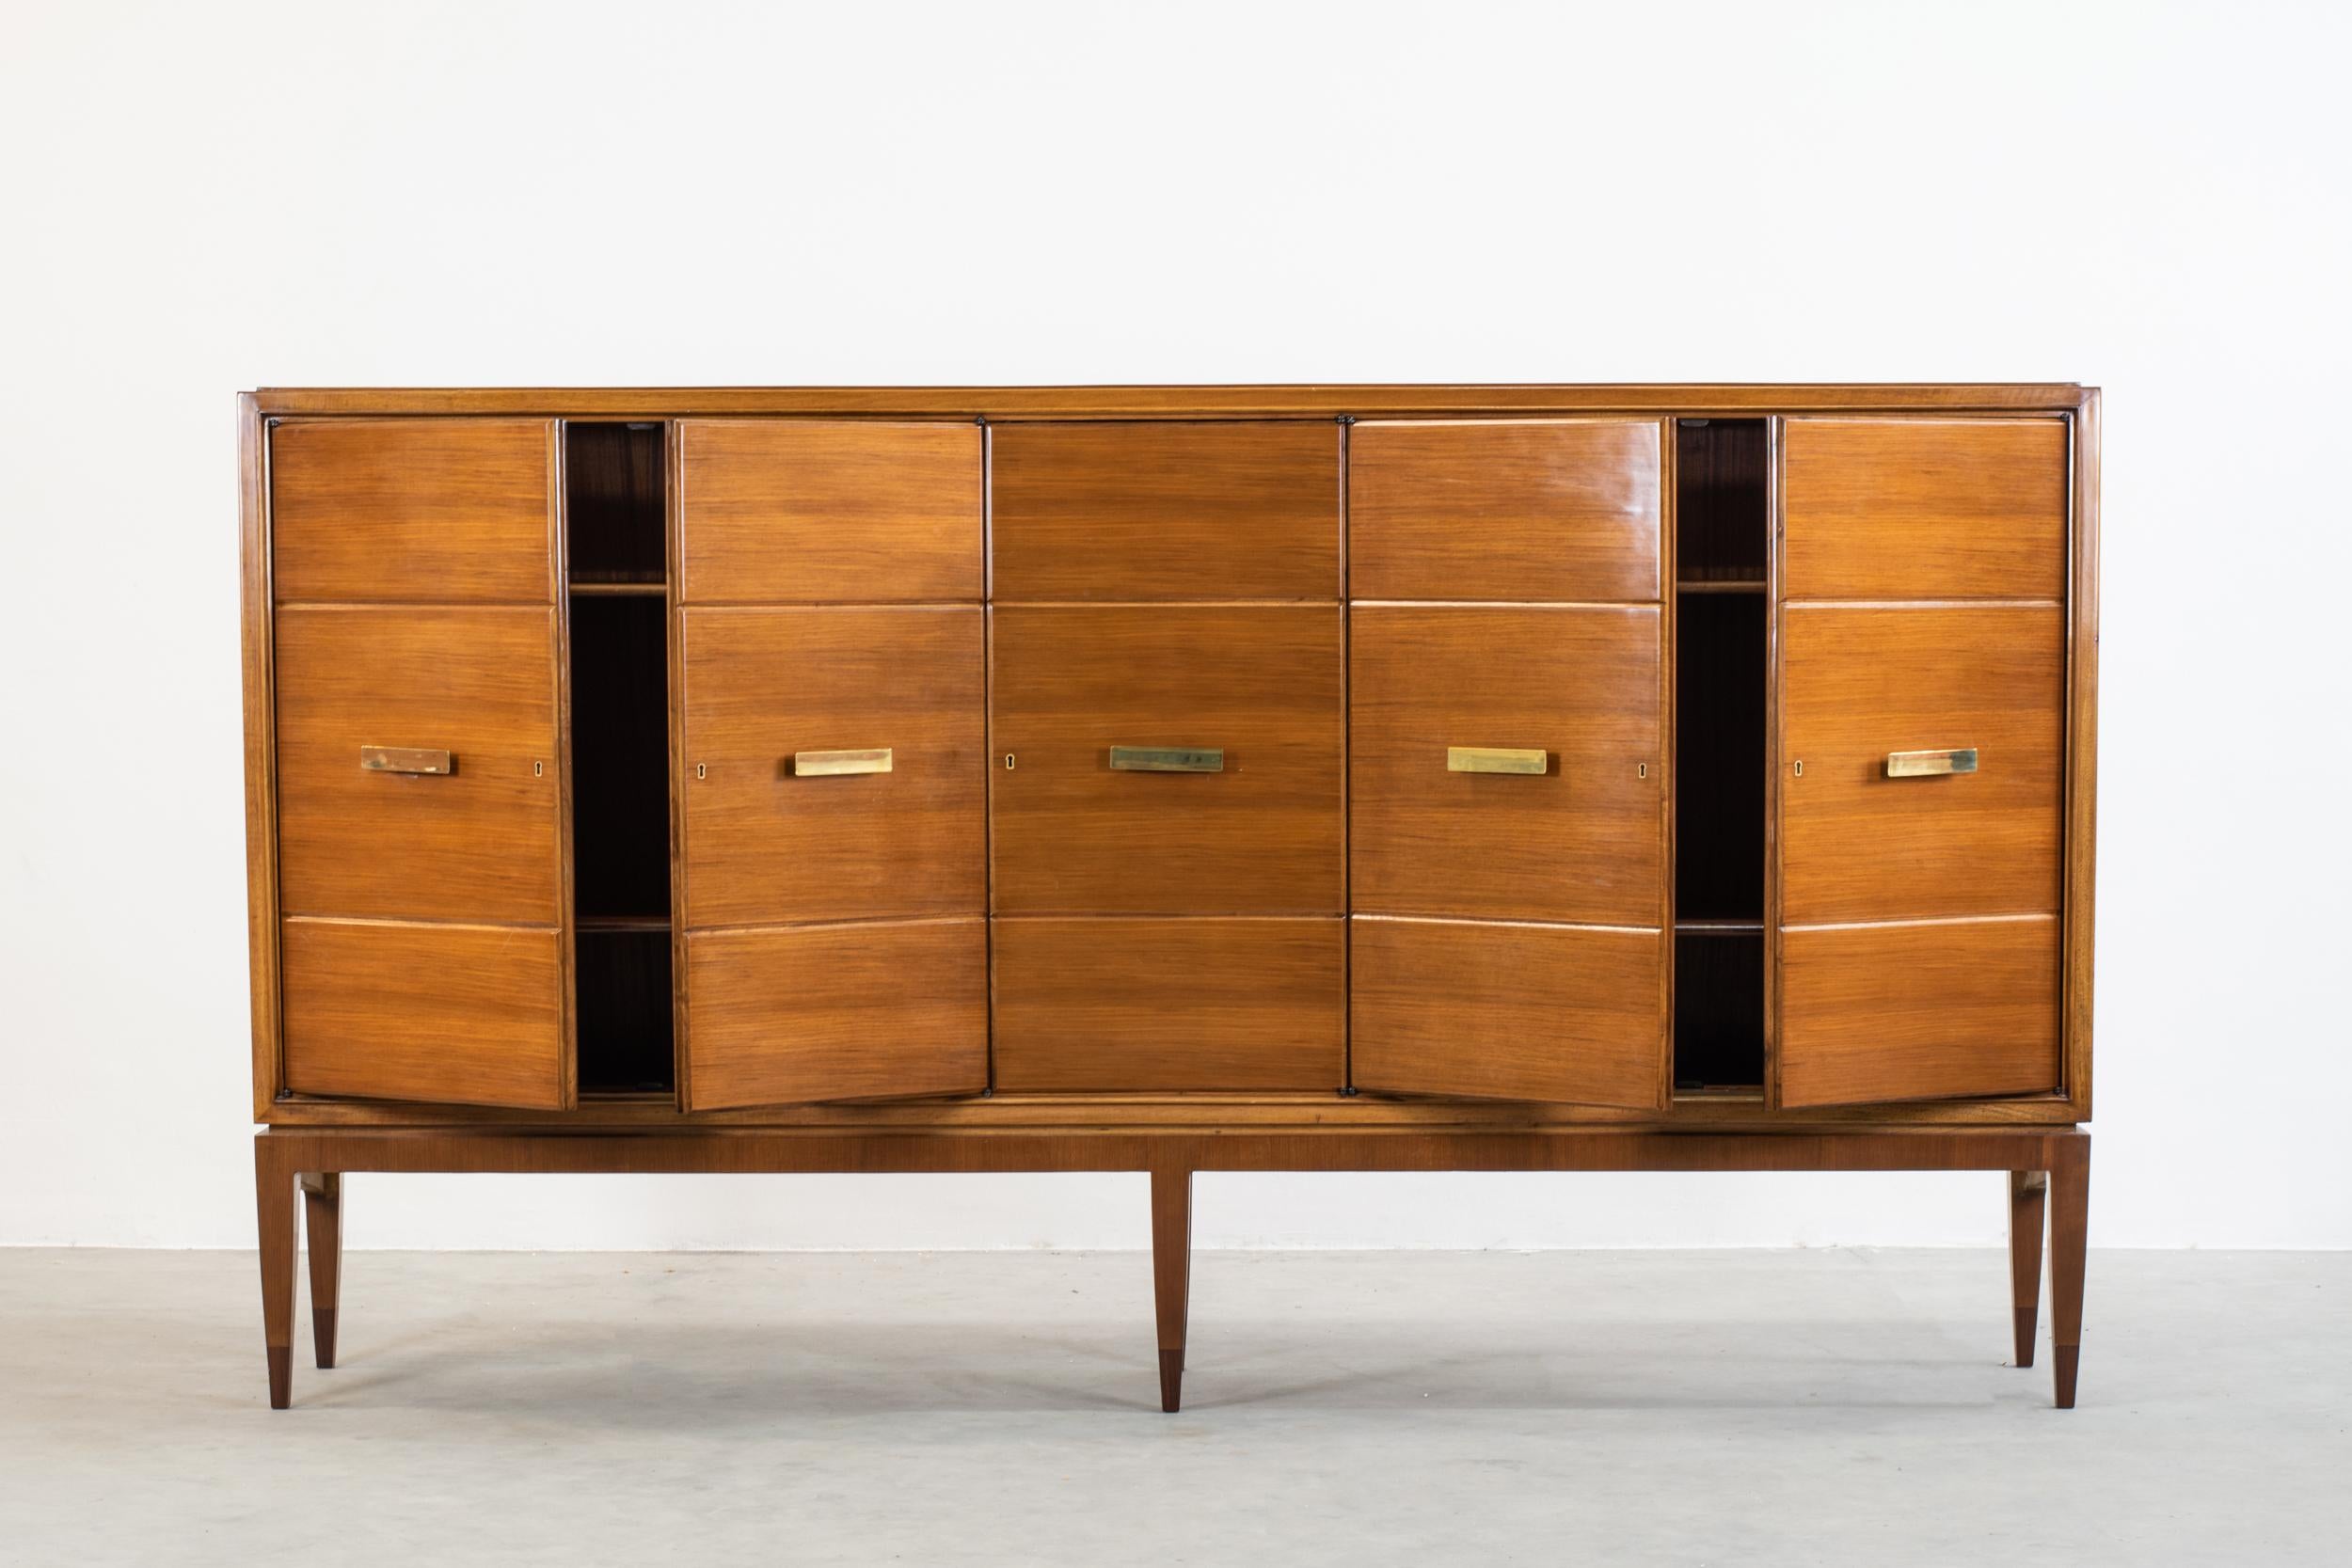 Mid-Century Modern Gio Ponti Large Sideboard in Walnut and Brass for Singer & Sons 1950s Italy 